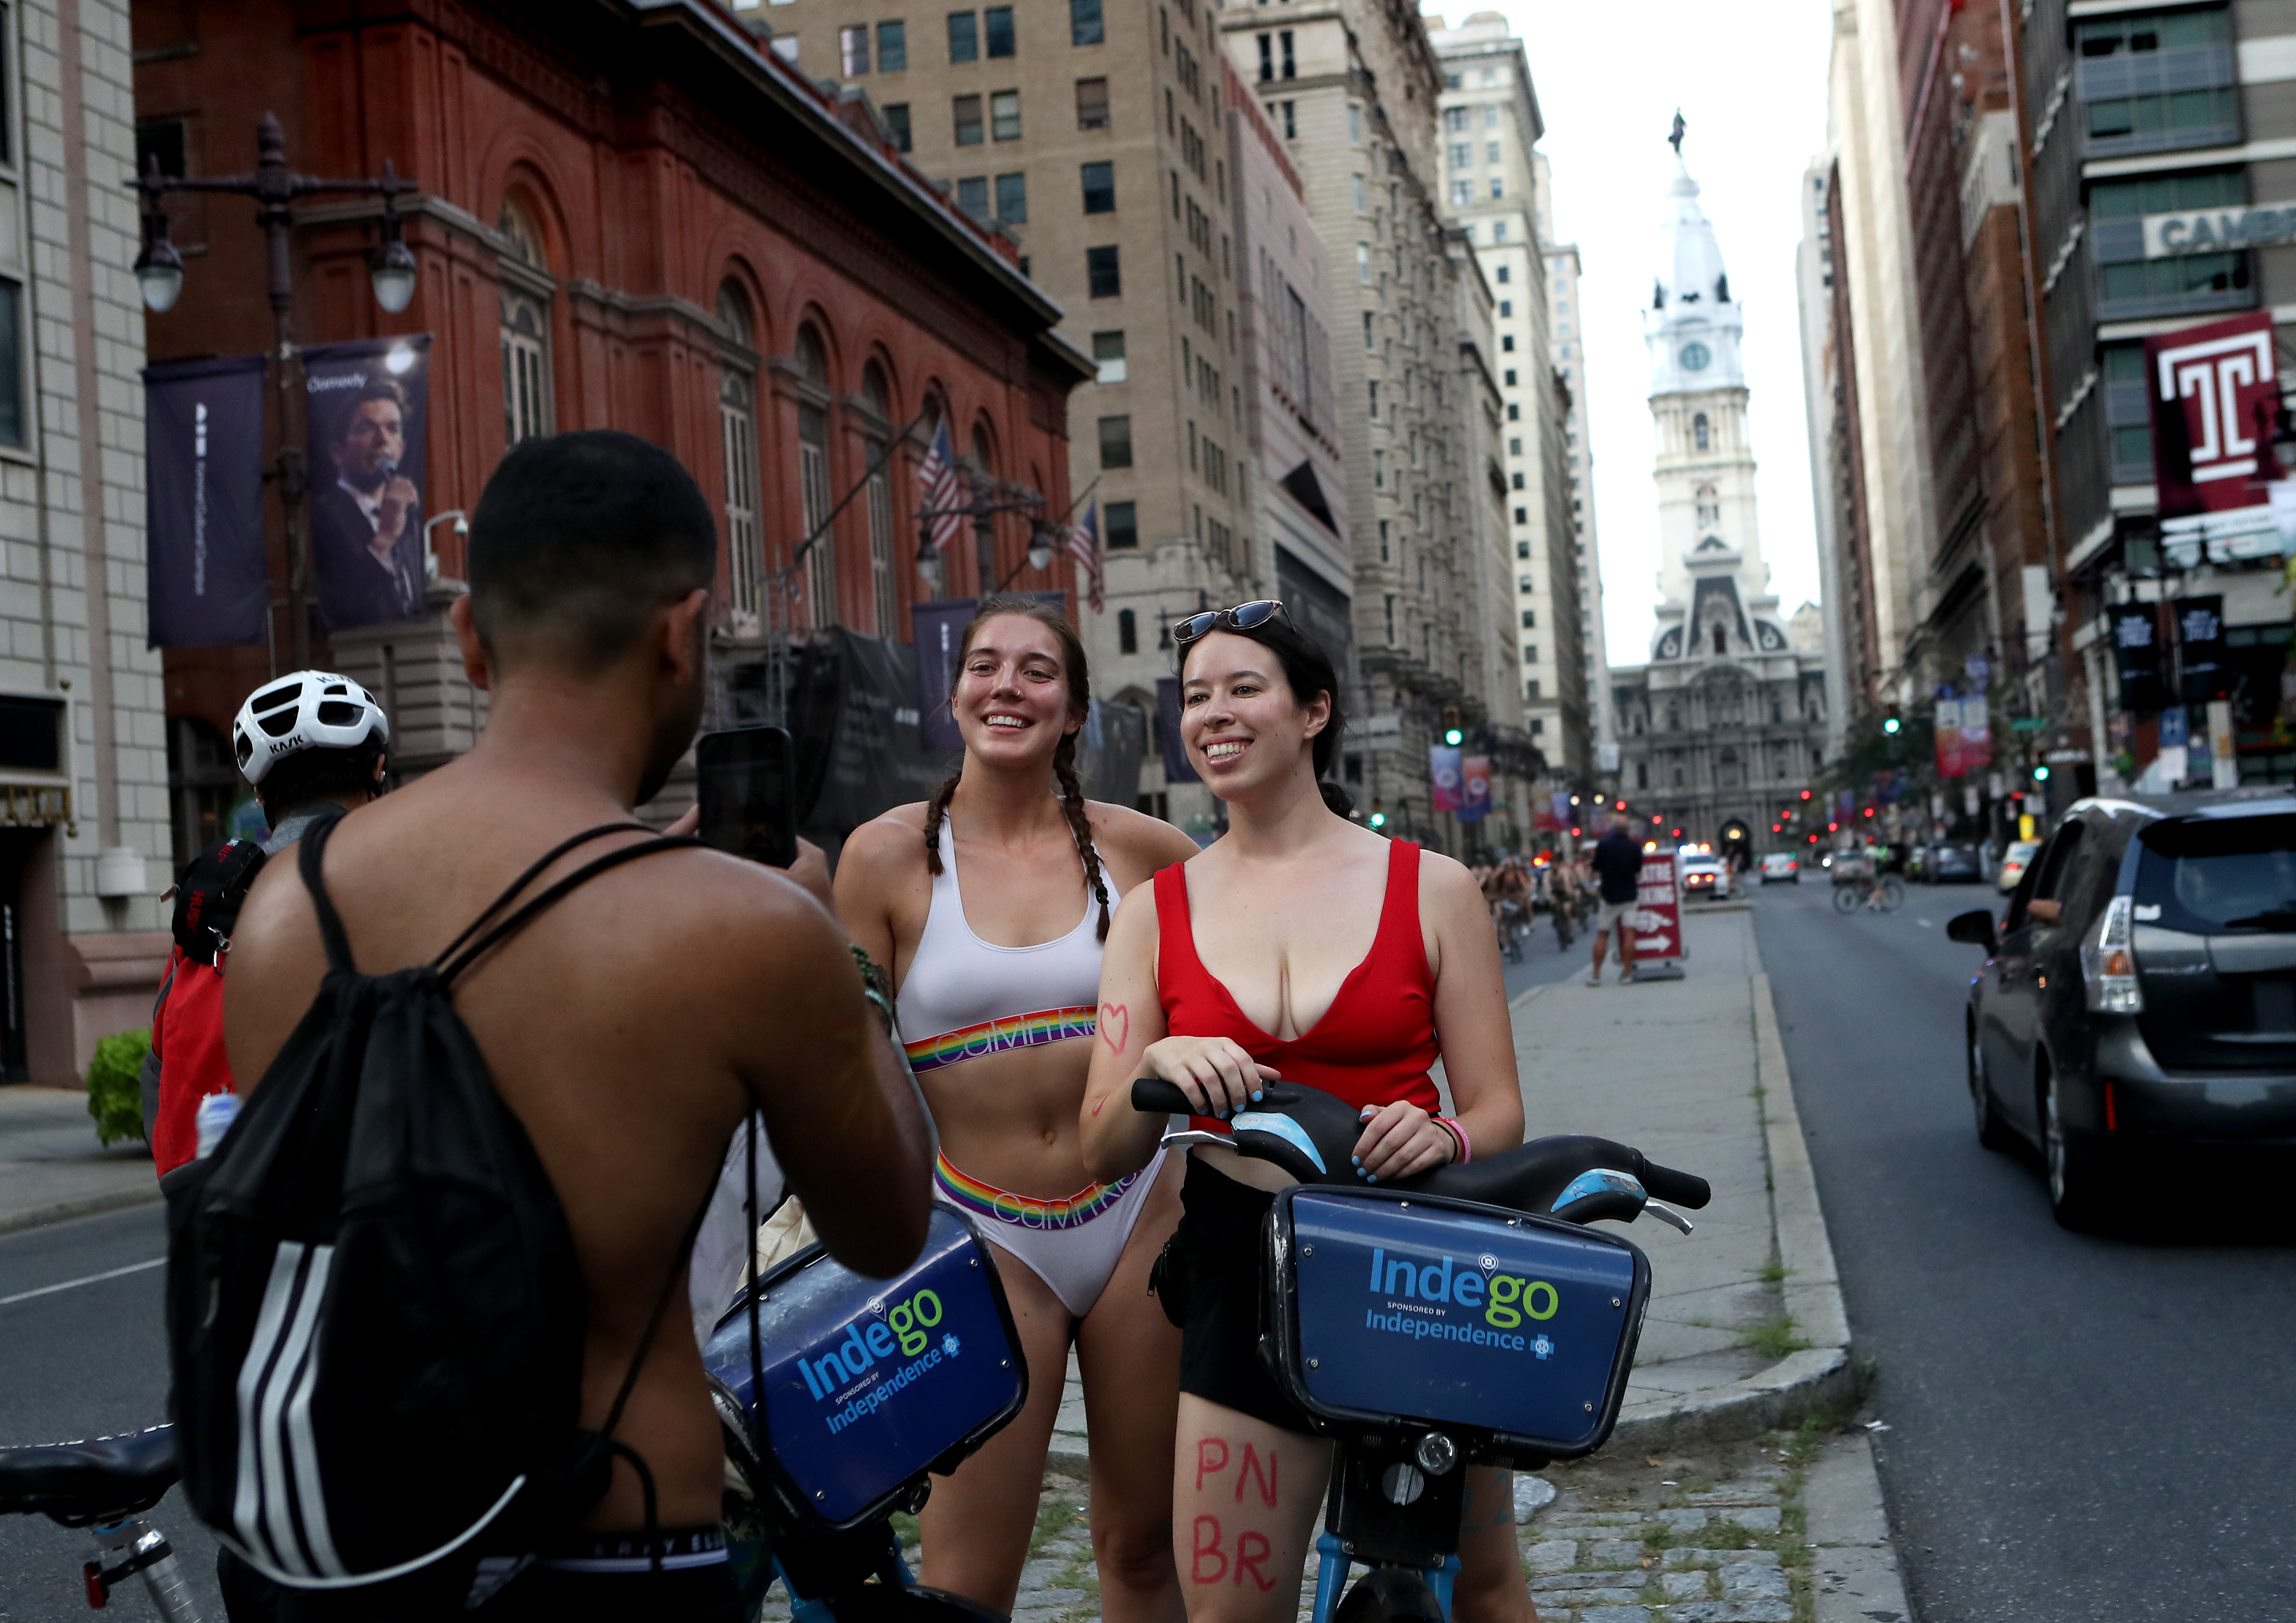 Philly Naked Bike Ride participants have their photo taken along South Broad Street in Philadelphia, Saturday, Aug. 27, 2022.